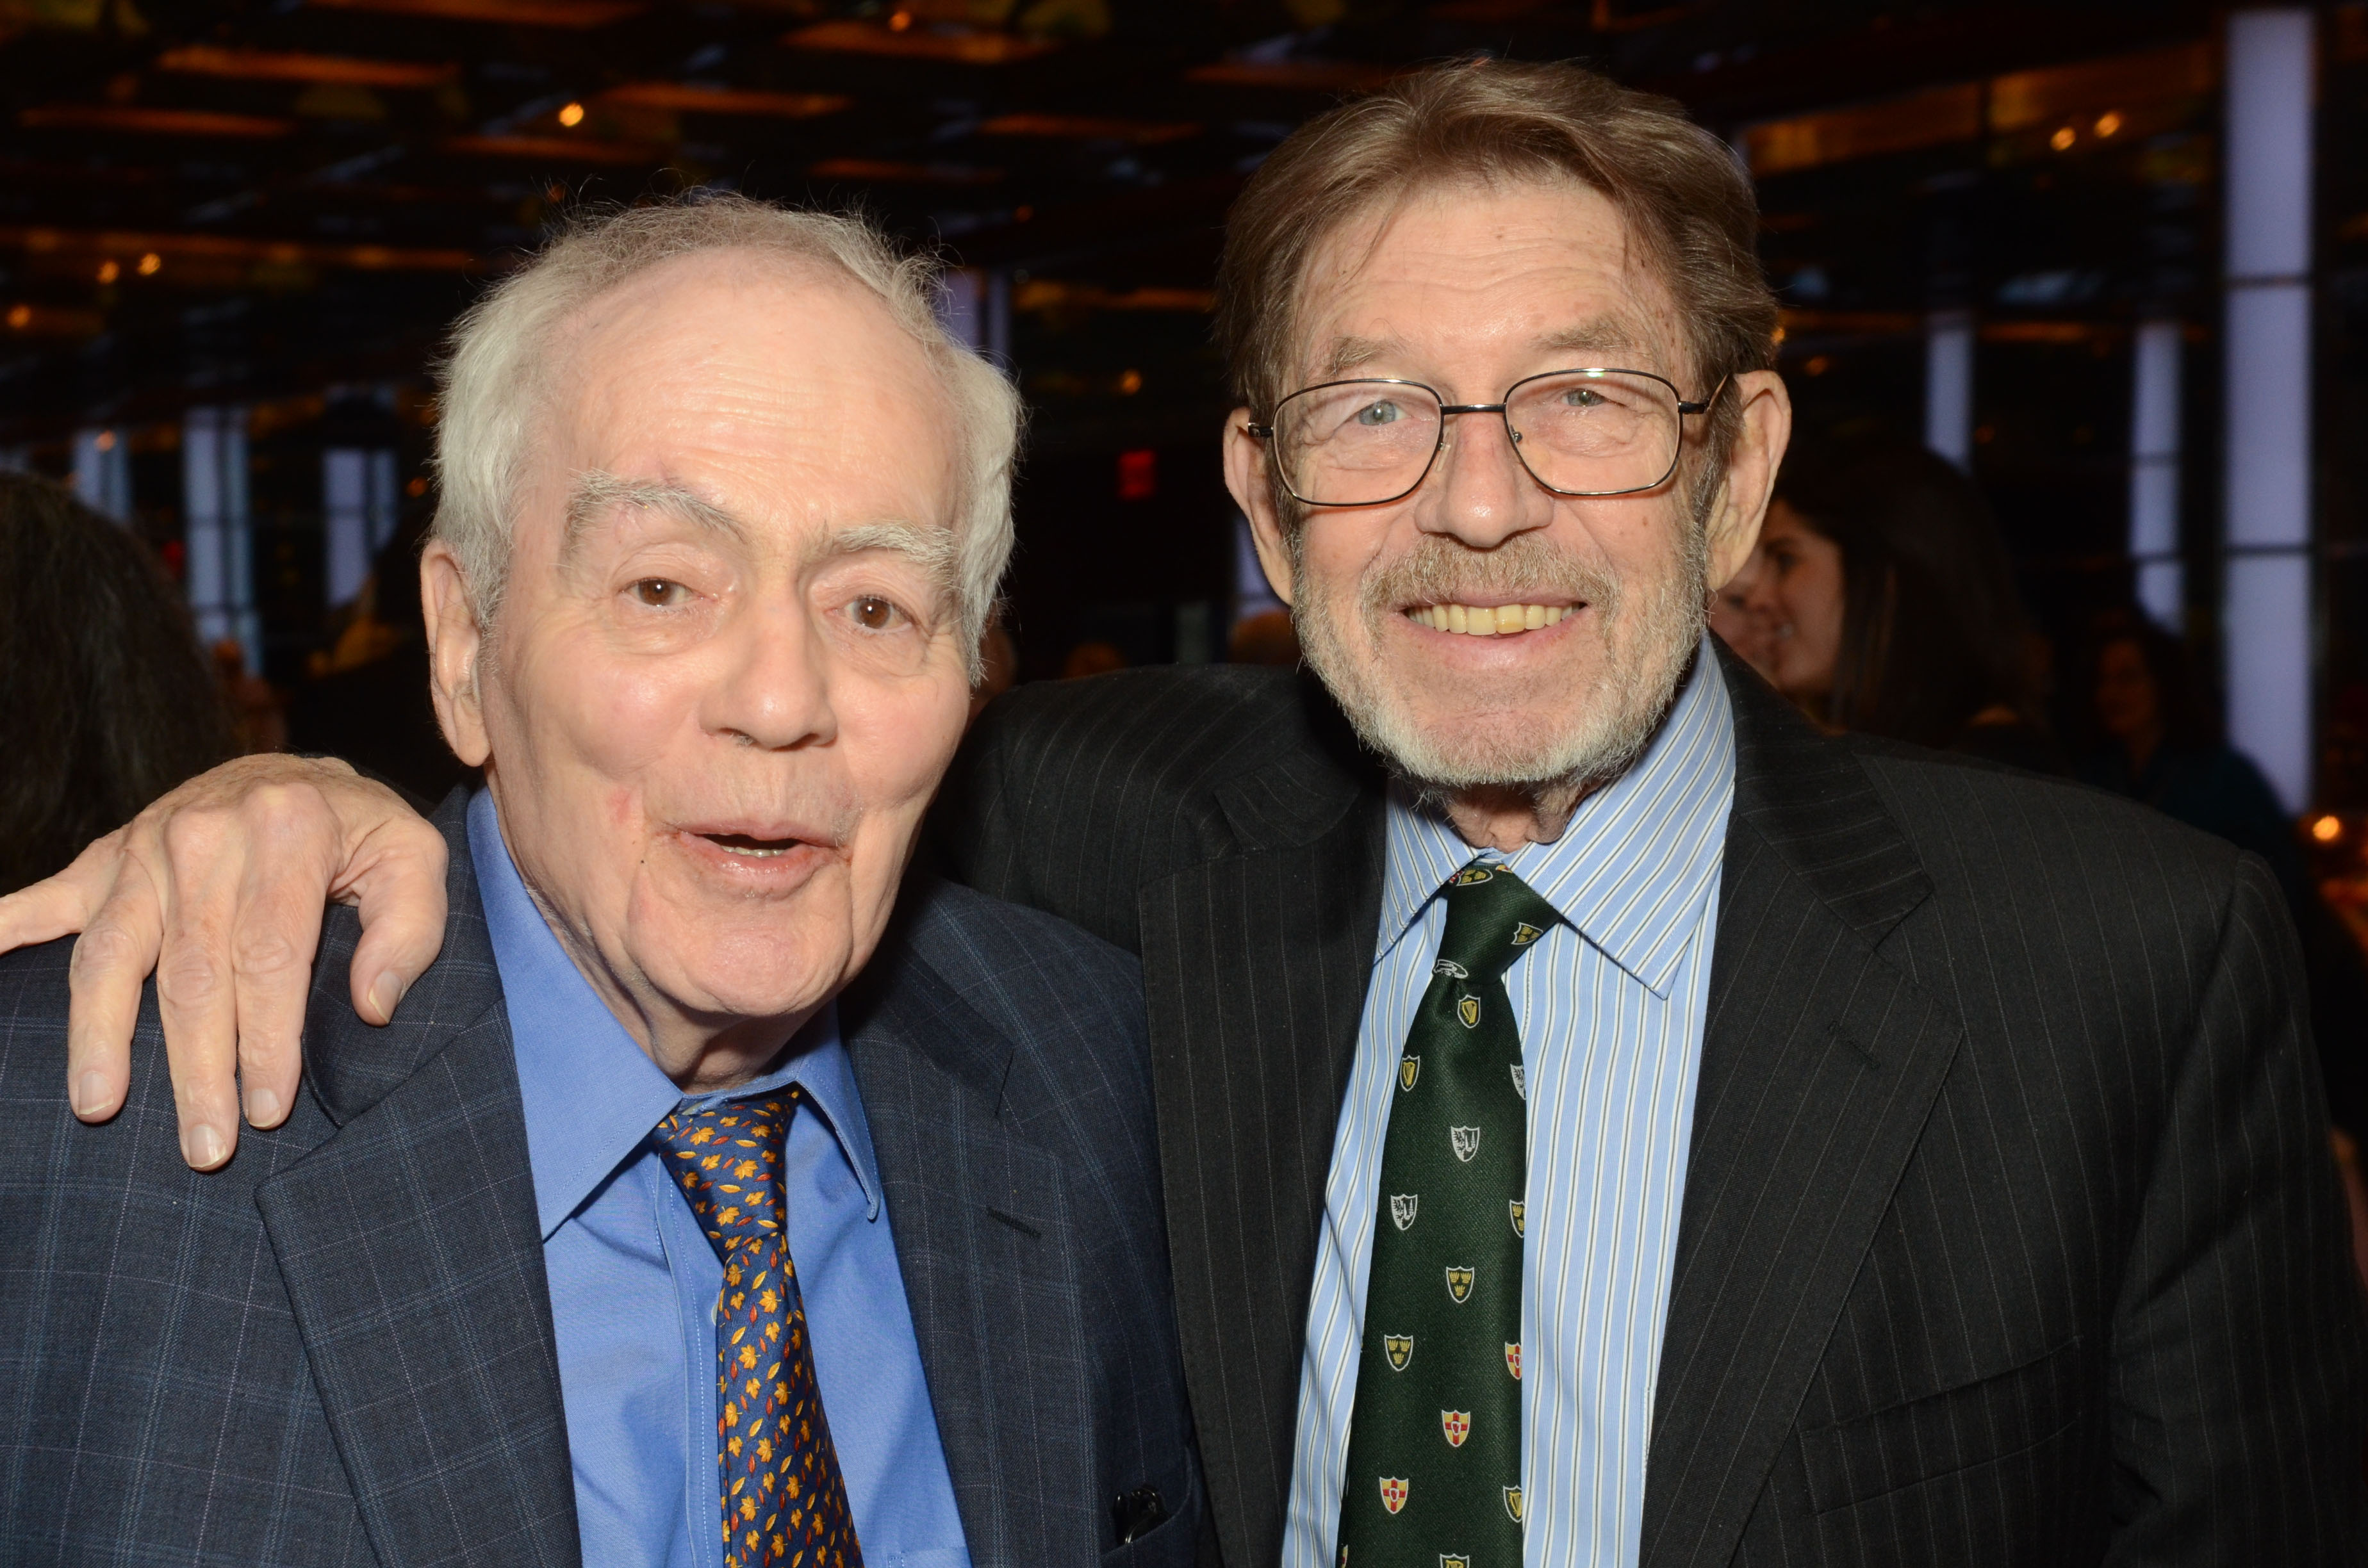 Breslin and Pete Hamill, another reporter credited with founding New Journalism, at the Glucksman Ireland House NYU Annual Gala, February 25, 2014 (Photos: James Higgins)